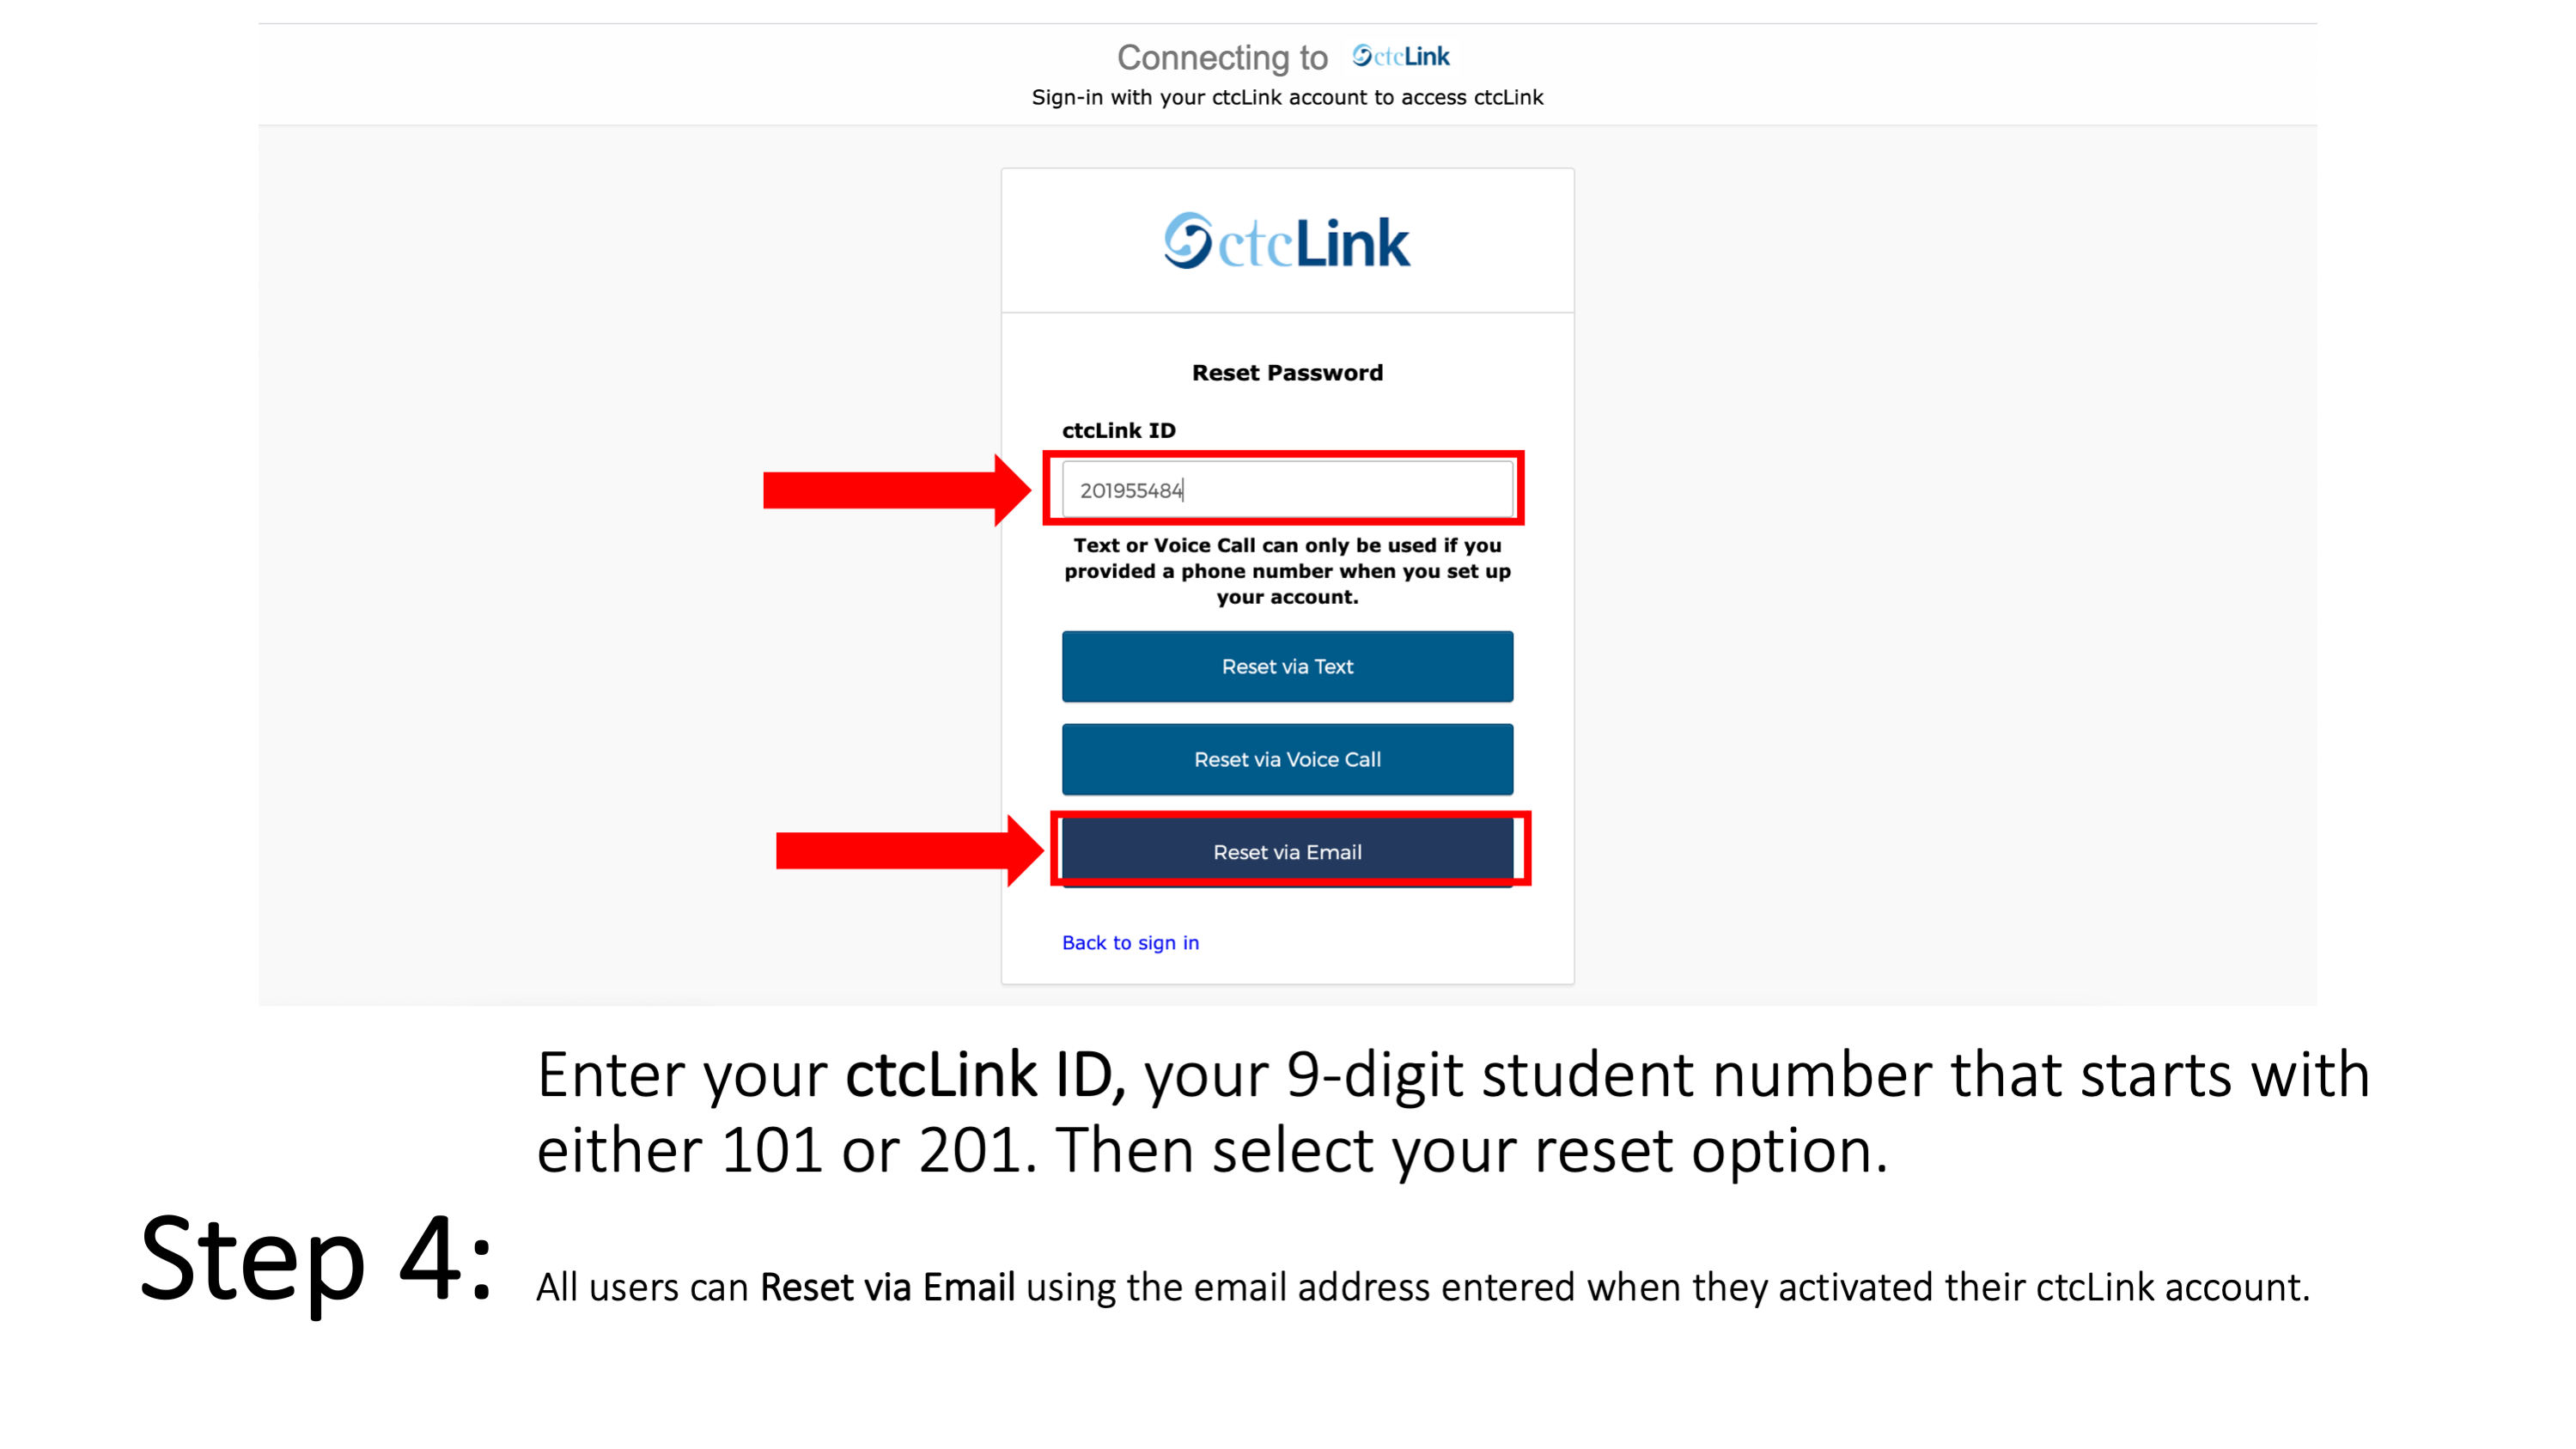 Step 4: Enter your ctcLink ID. It is your 9-digit student number that starts with either 101 or 201. Then select your reset option. All users can Reset via Email using the email address entered when they activated their ctcLink account.